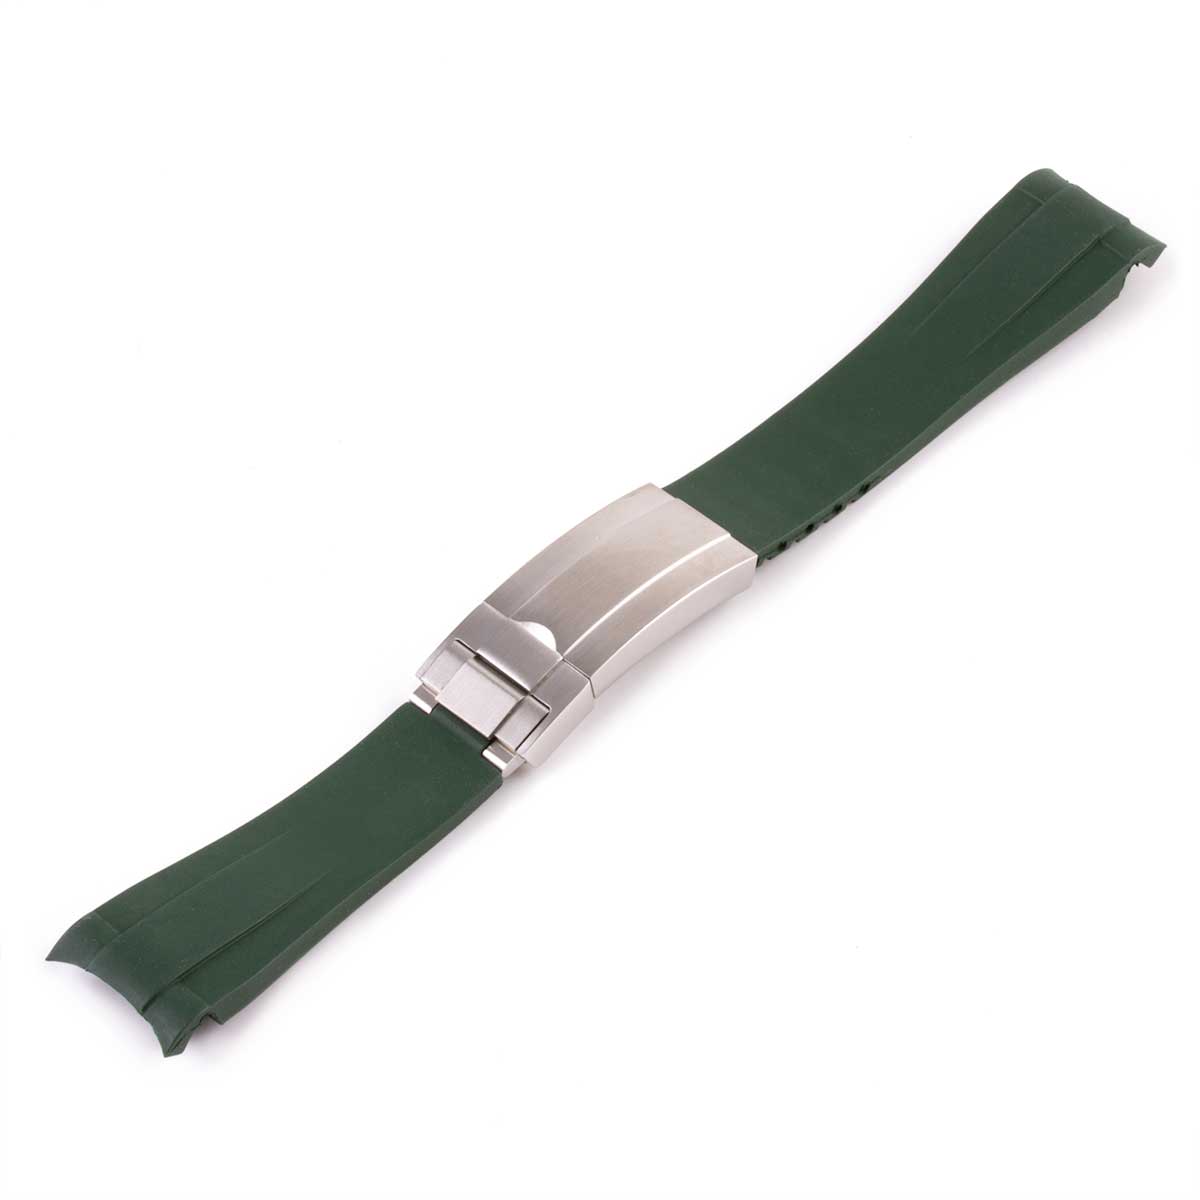 ​Rolex - Rubber integrated watch band in 20mm with generic clasp (black, brown, blue, green...)